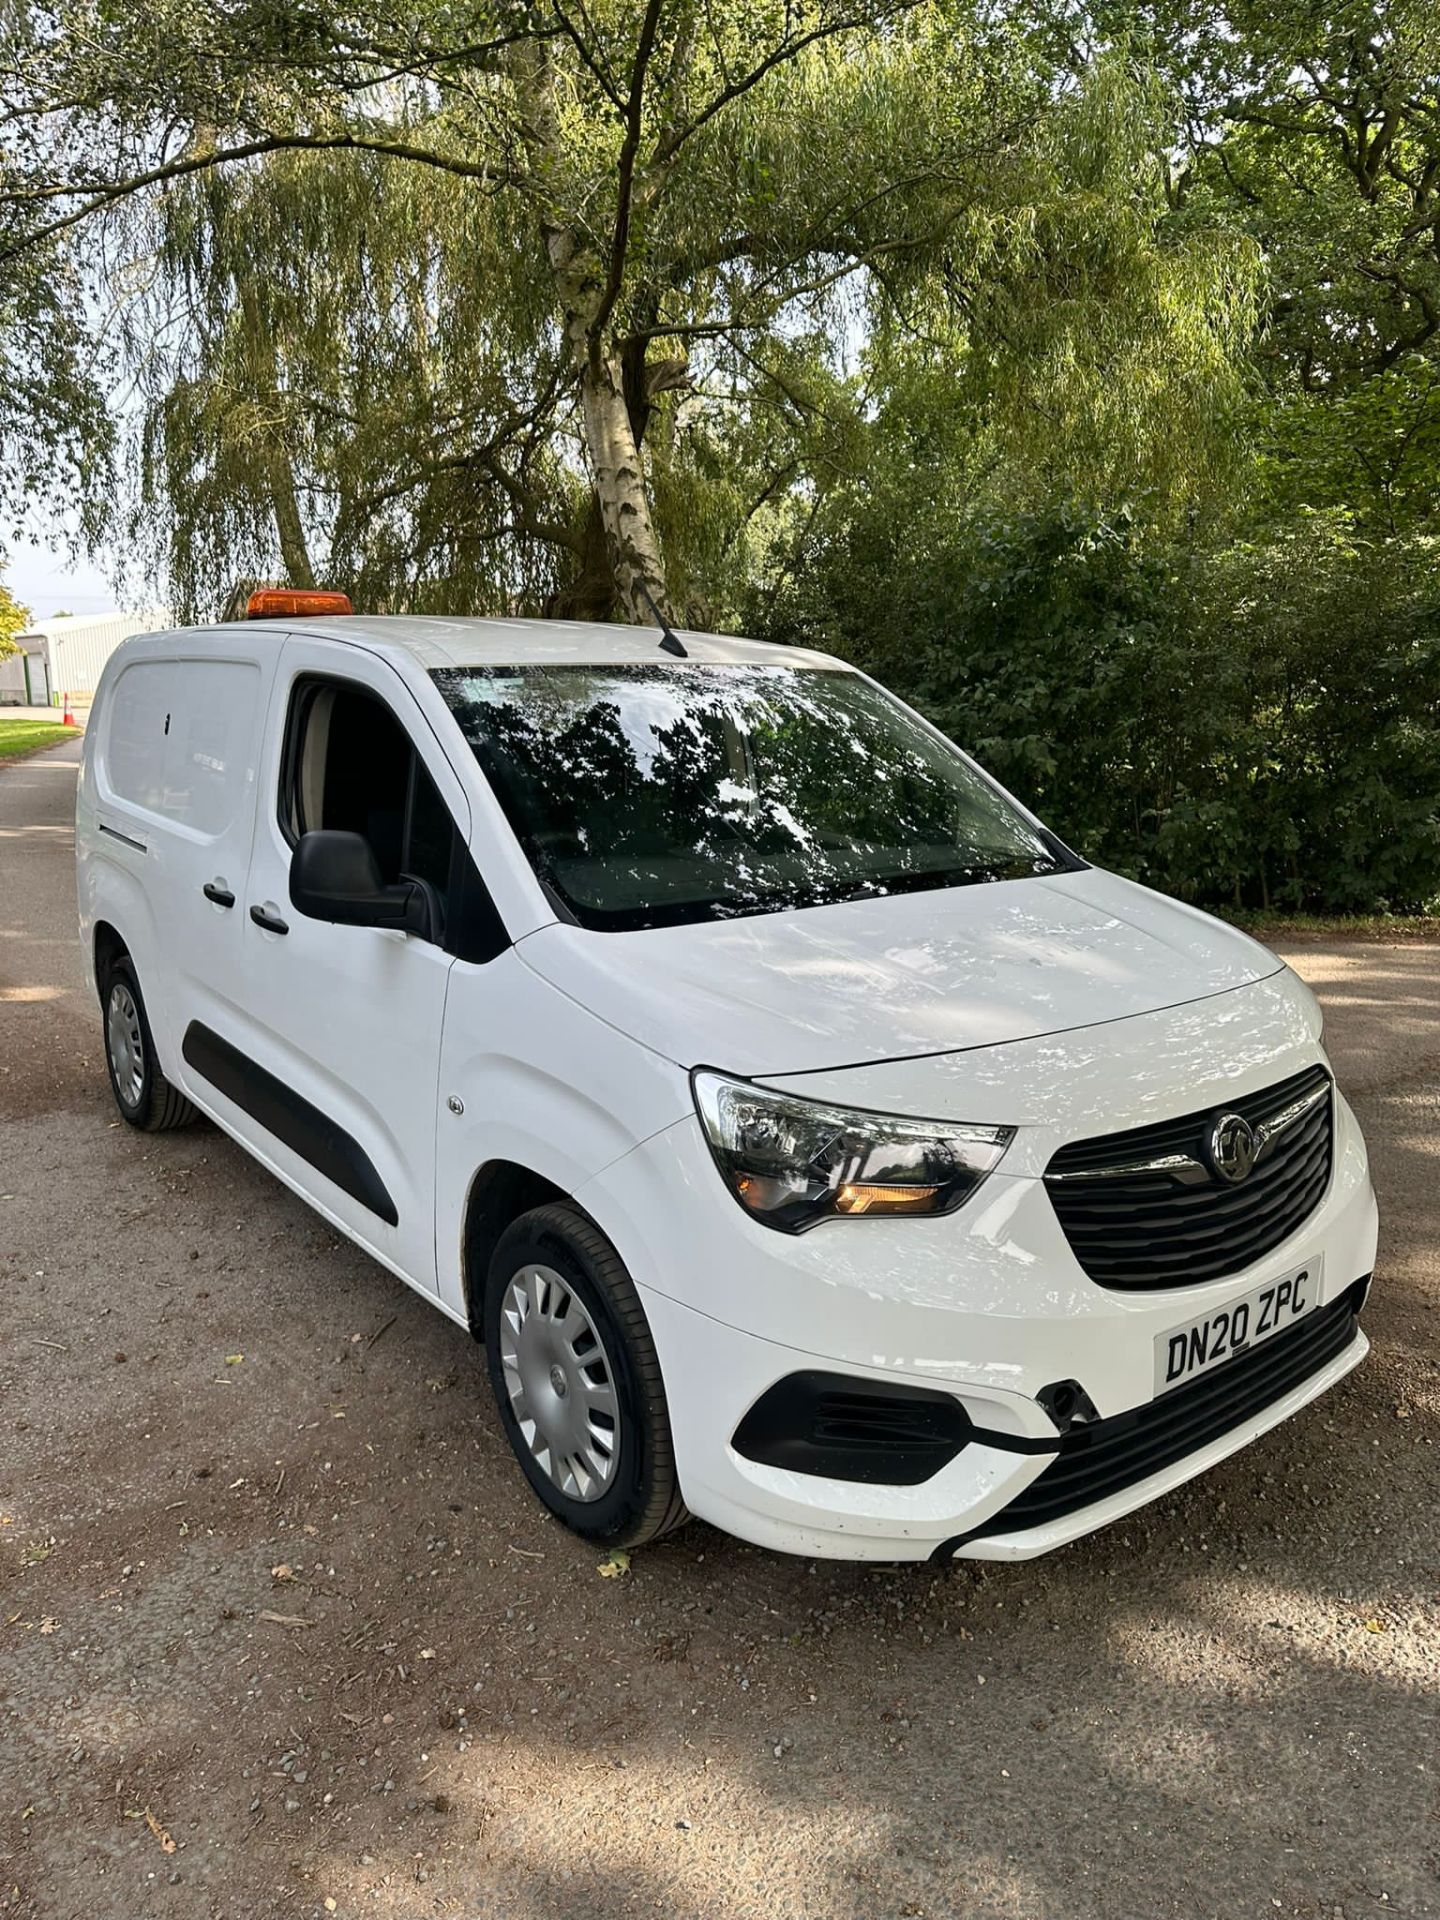 2020 20 Vauxhall combo sportive Panel van - 73k miles - Euro 6 - Lwb - Air con - ply lined